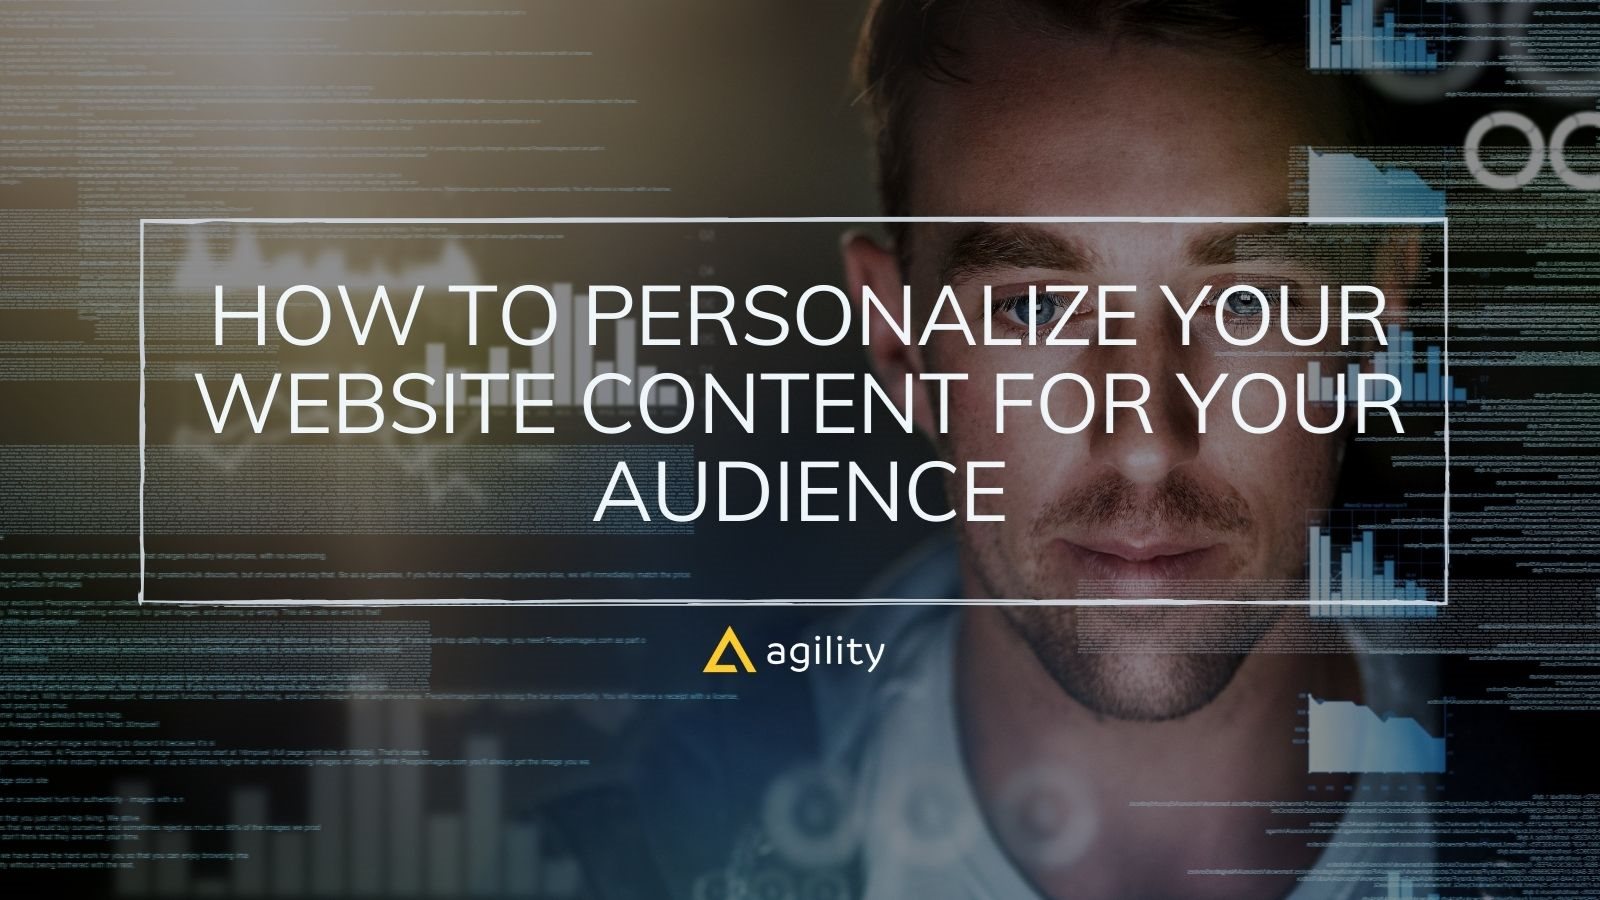 How to Personalize Your Website Content for your Audience